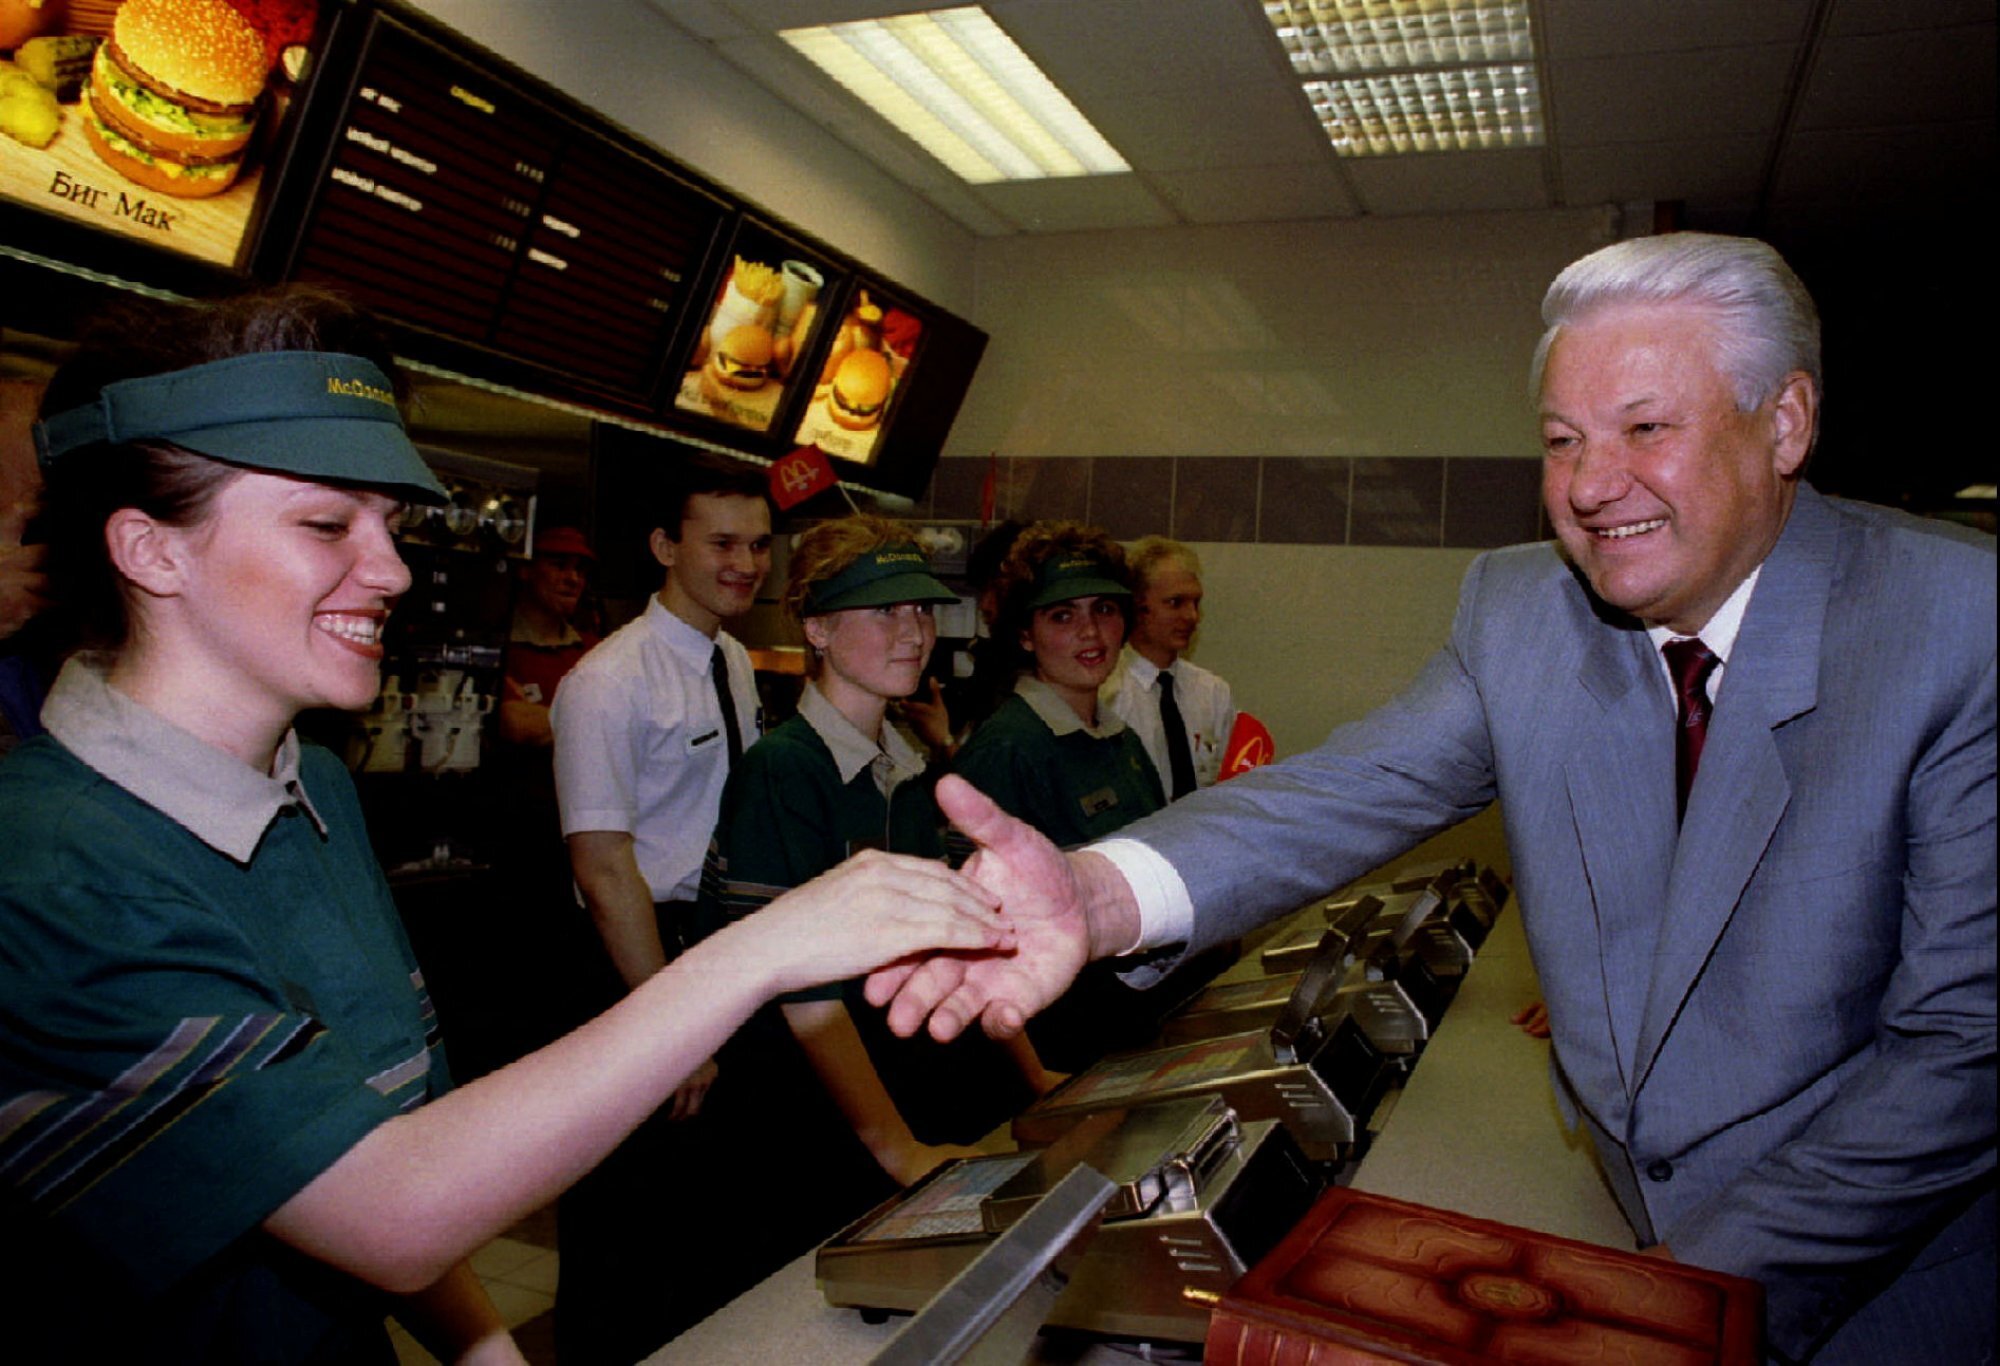 Russia’s then President Boris Yeltsin shakes hands with a cashier while visiting the country’s second McDonald’s restaurant, which opened in Moscow in June, 1990. PHOTO: Reuters